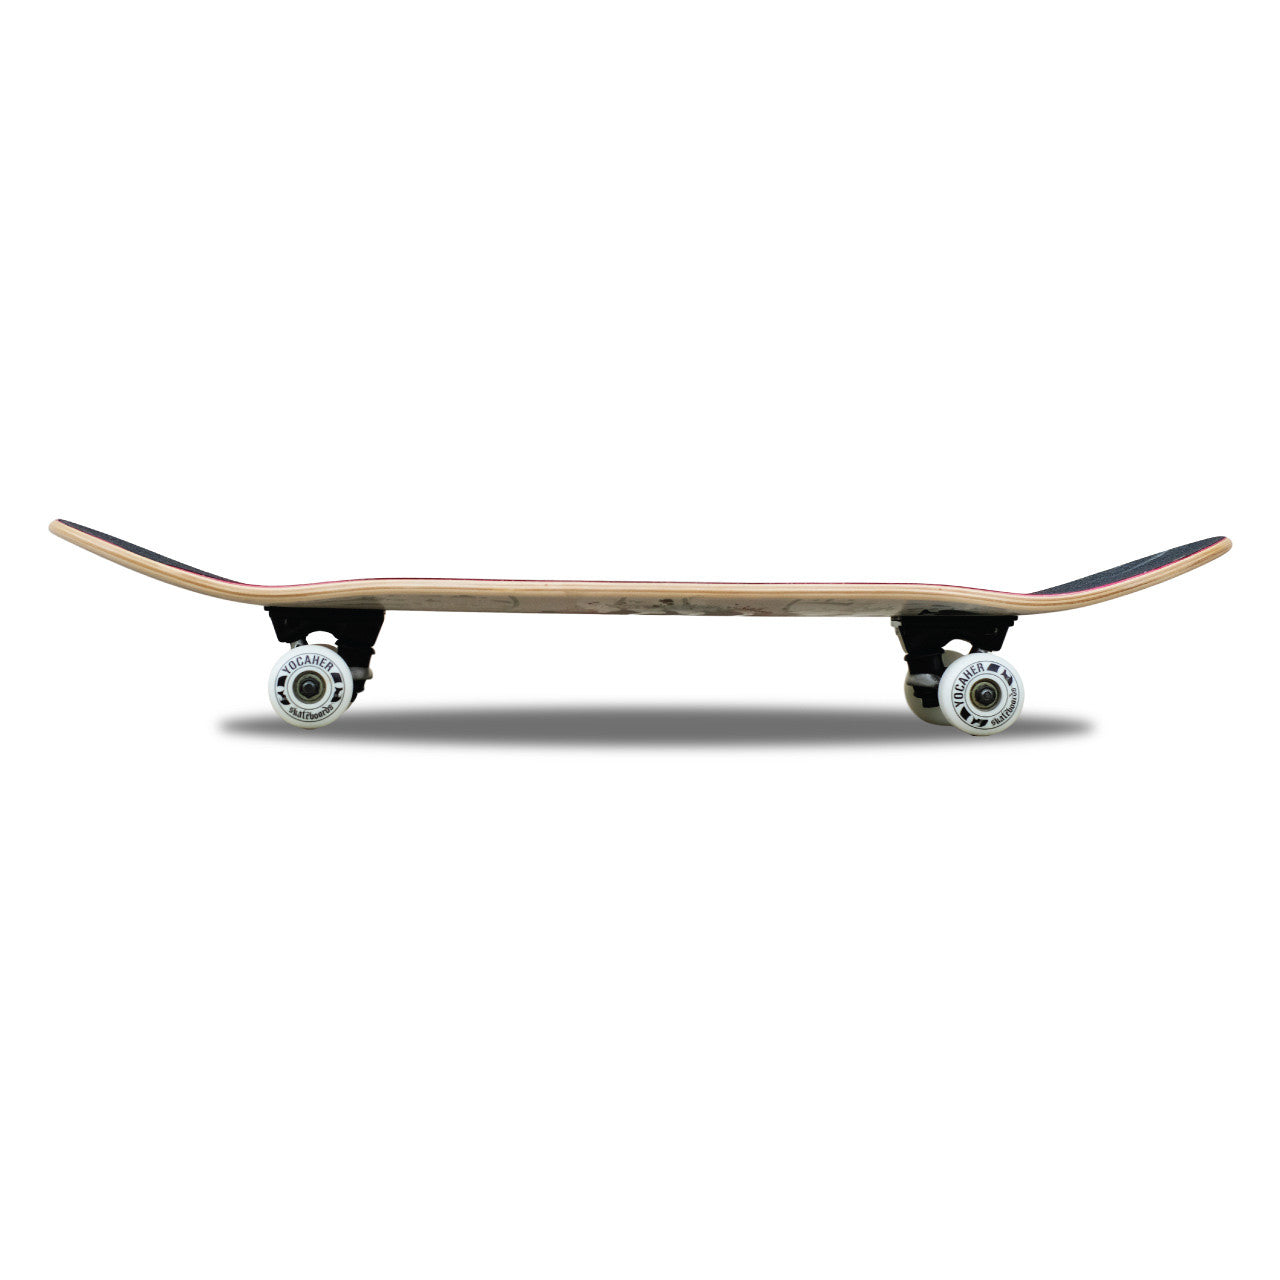 Yocaher Complete Skateboard 7.75" - The Bird Green